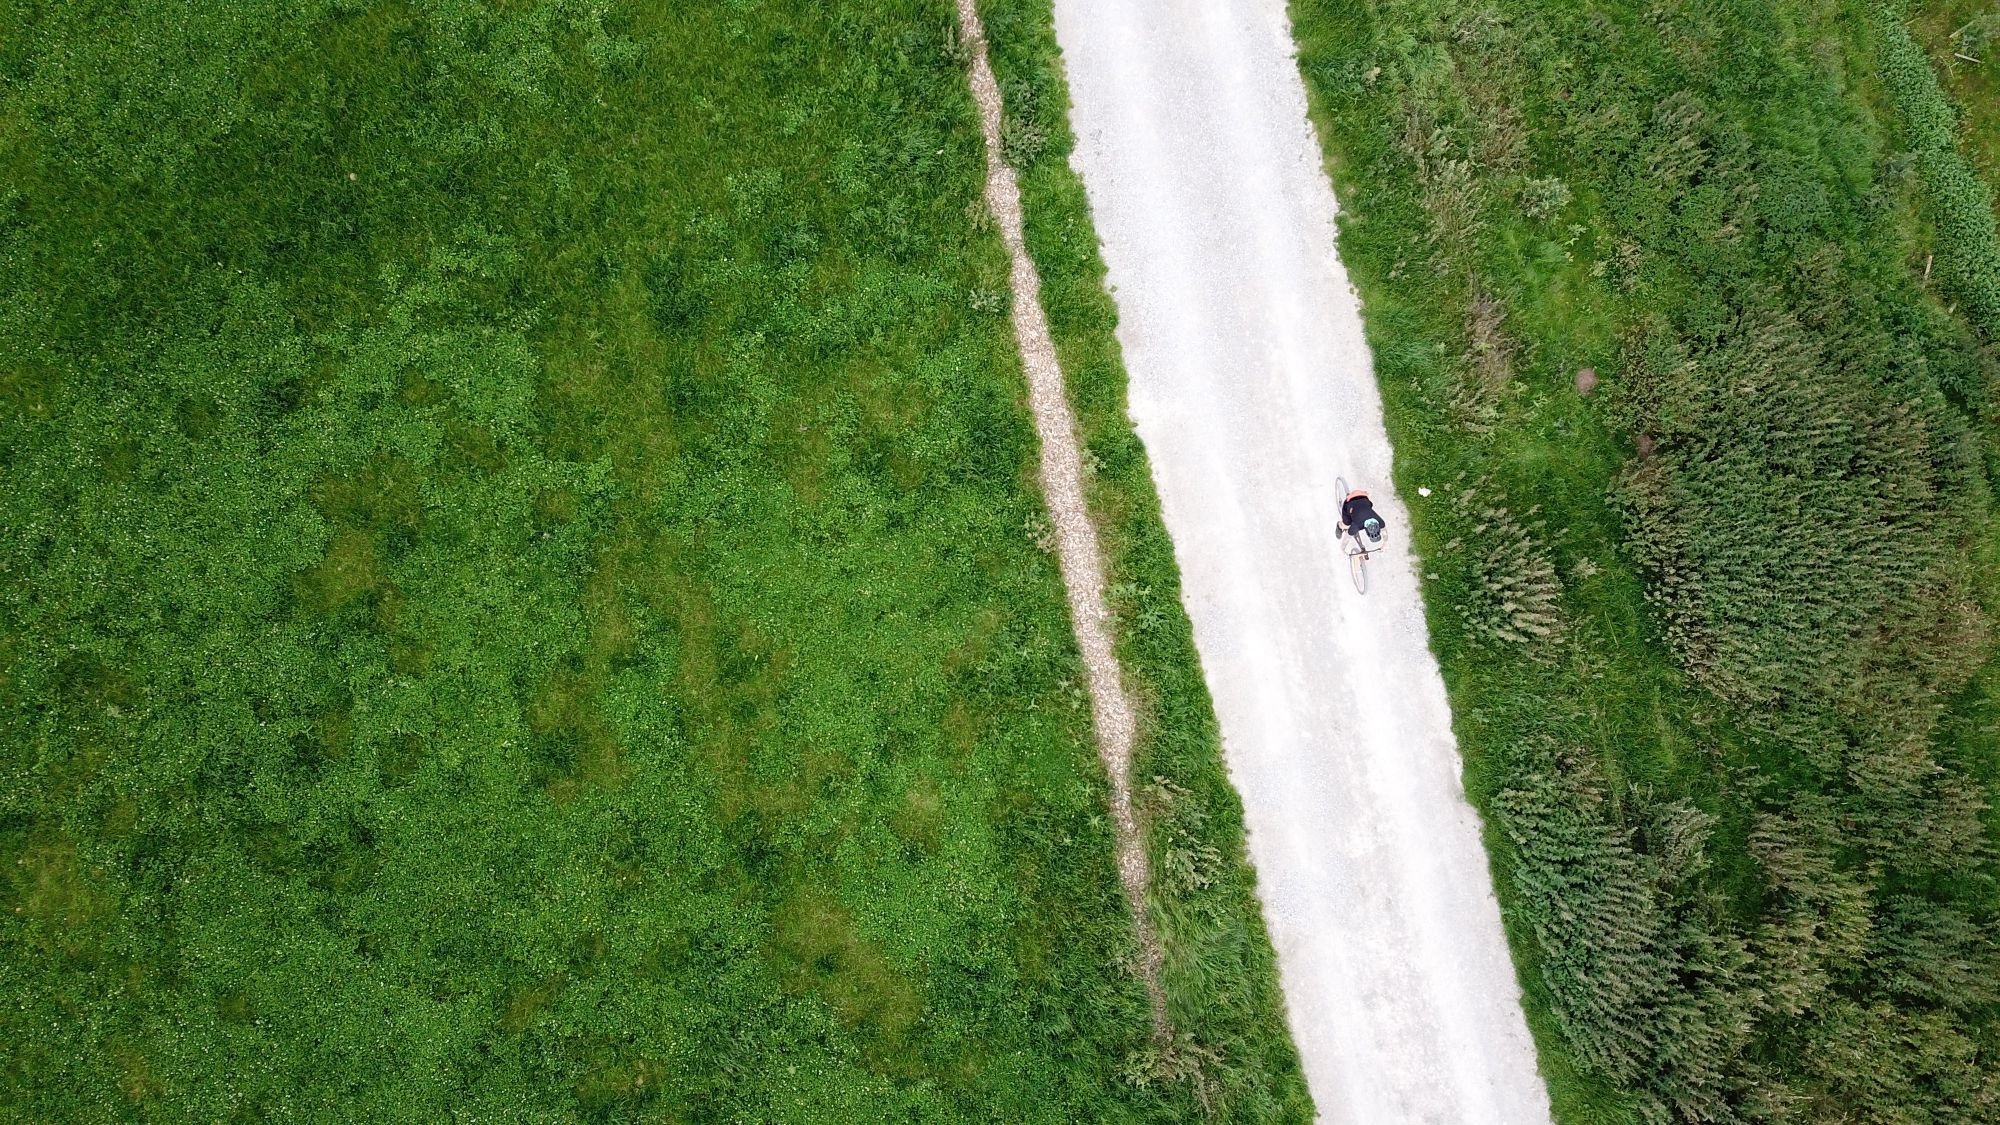 The beautiful white gravel trails near Milton Keynes could convince you you're in the French backcountry.